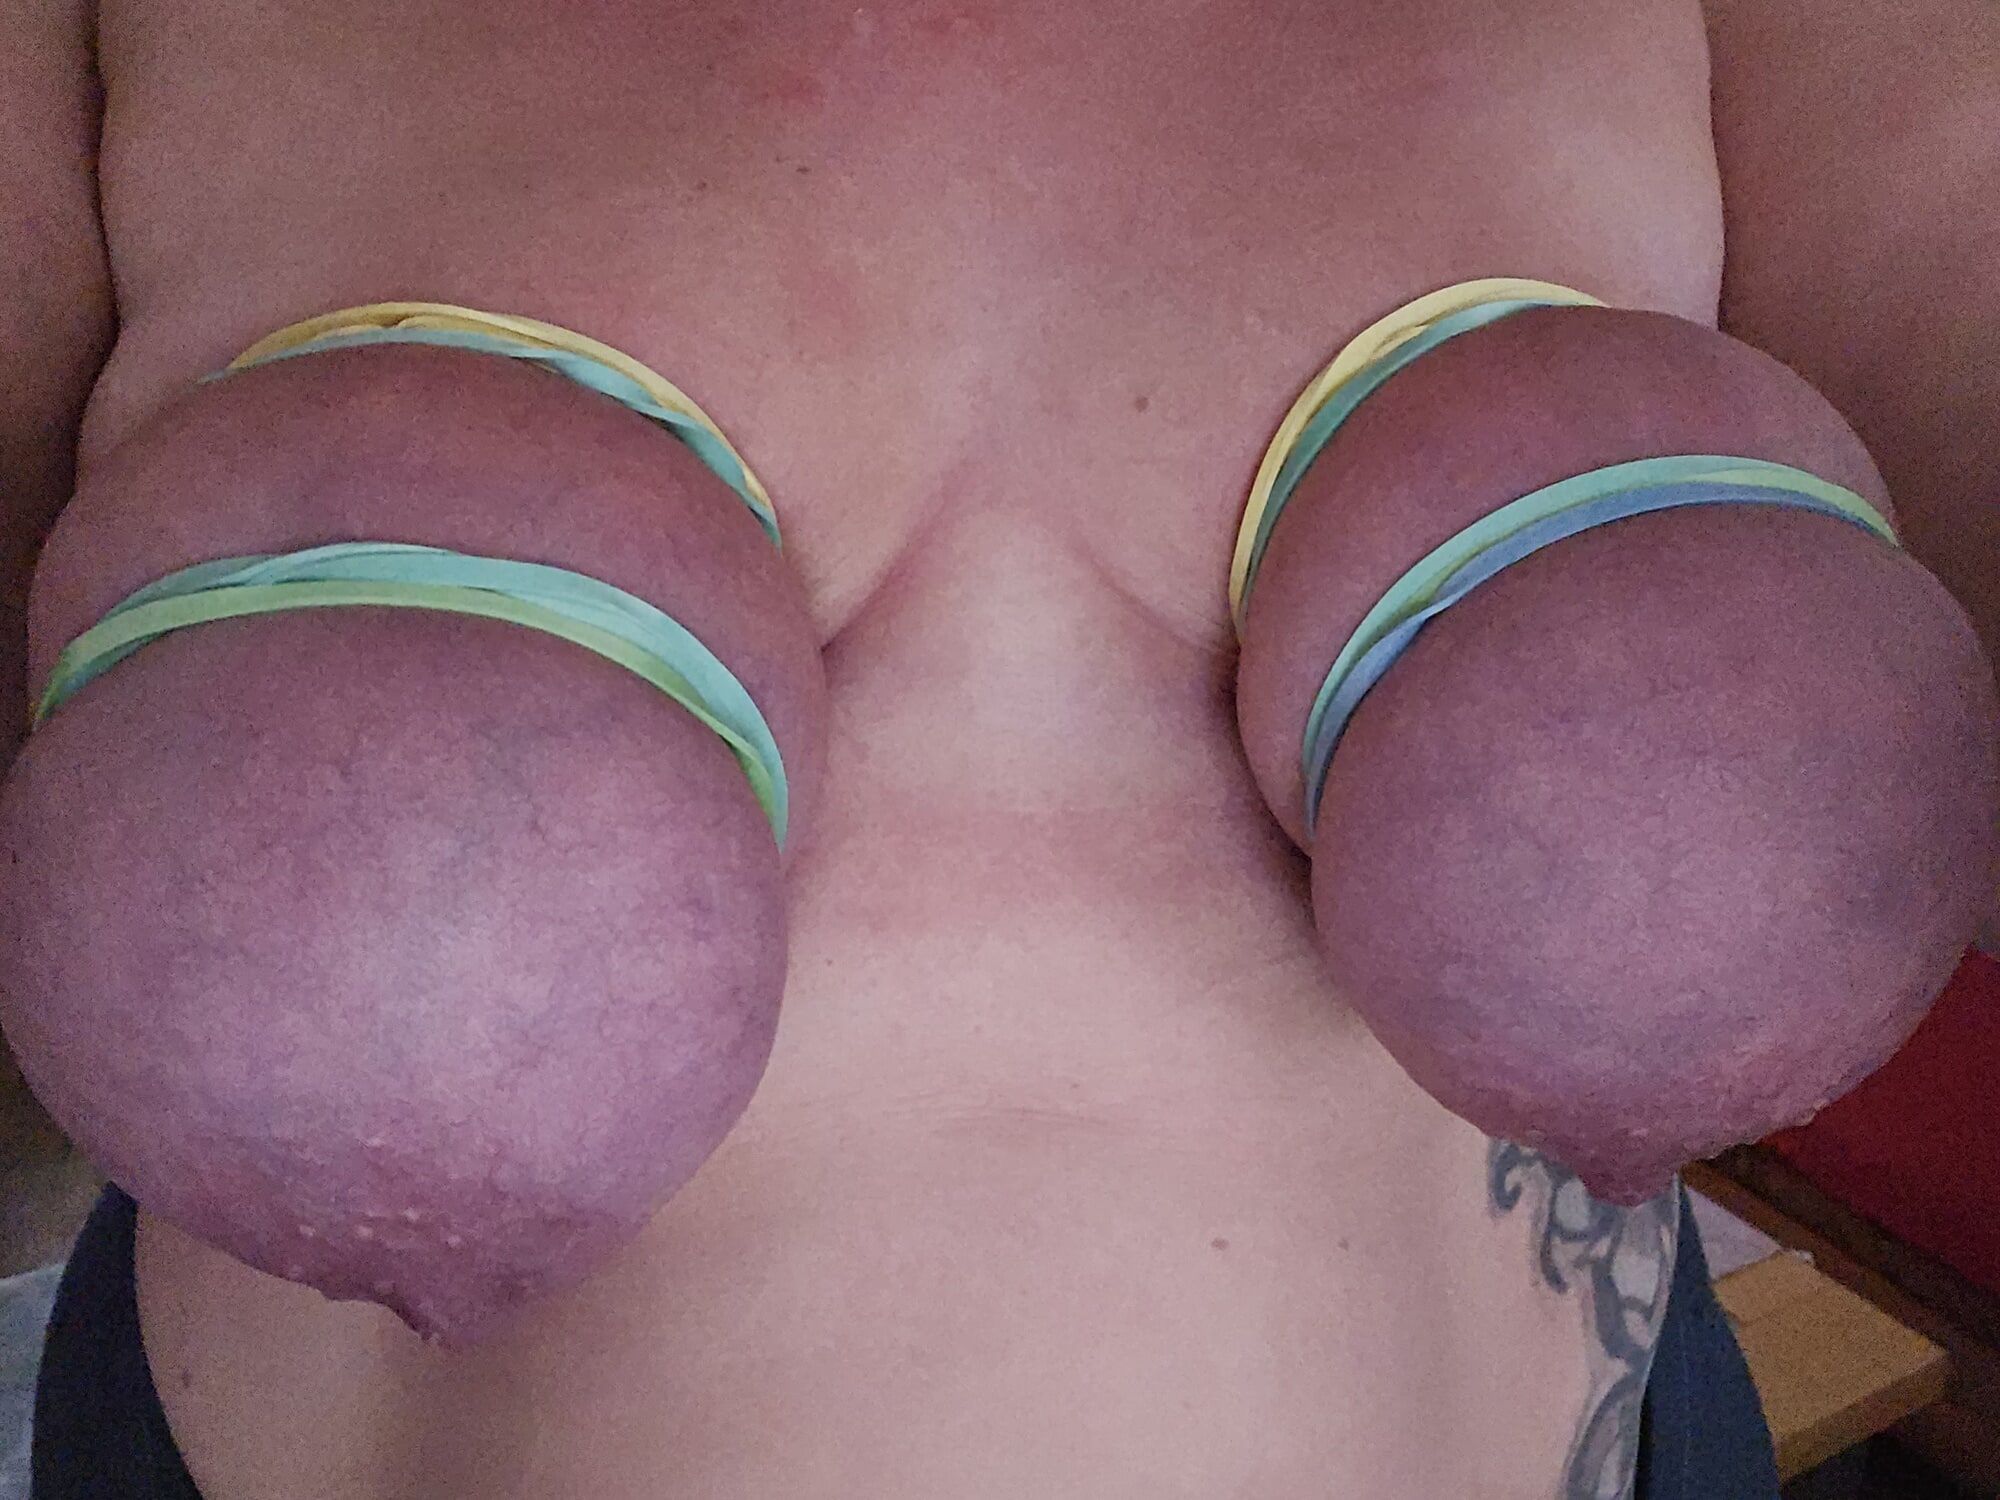 rubber bands on my tits